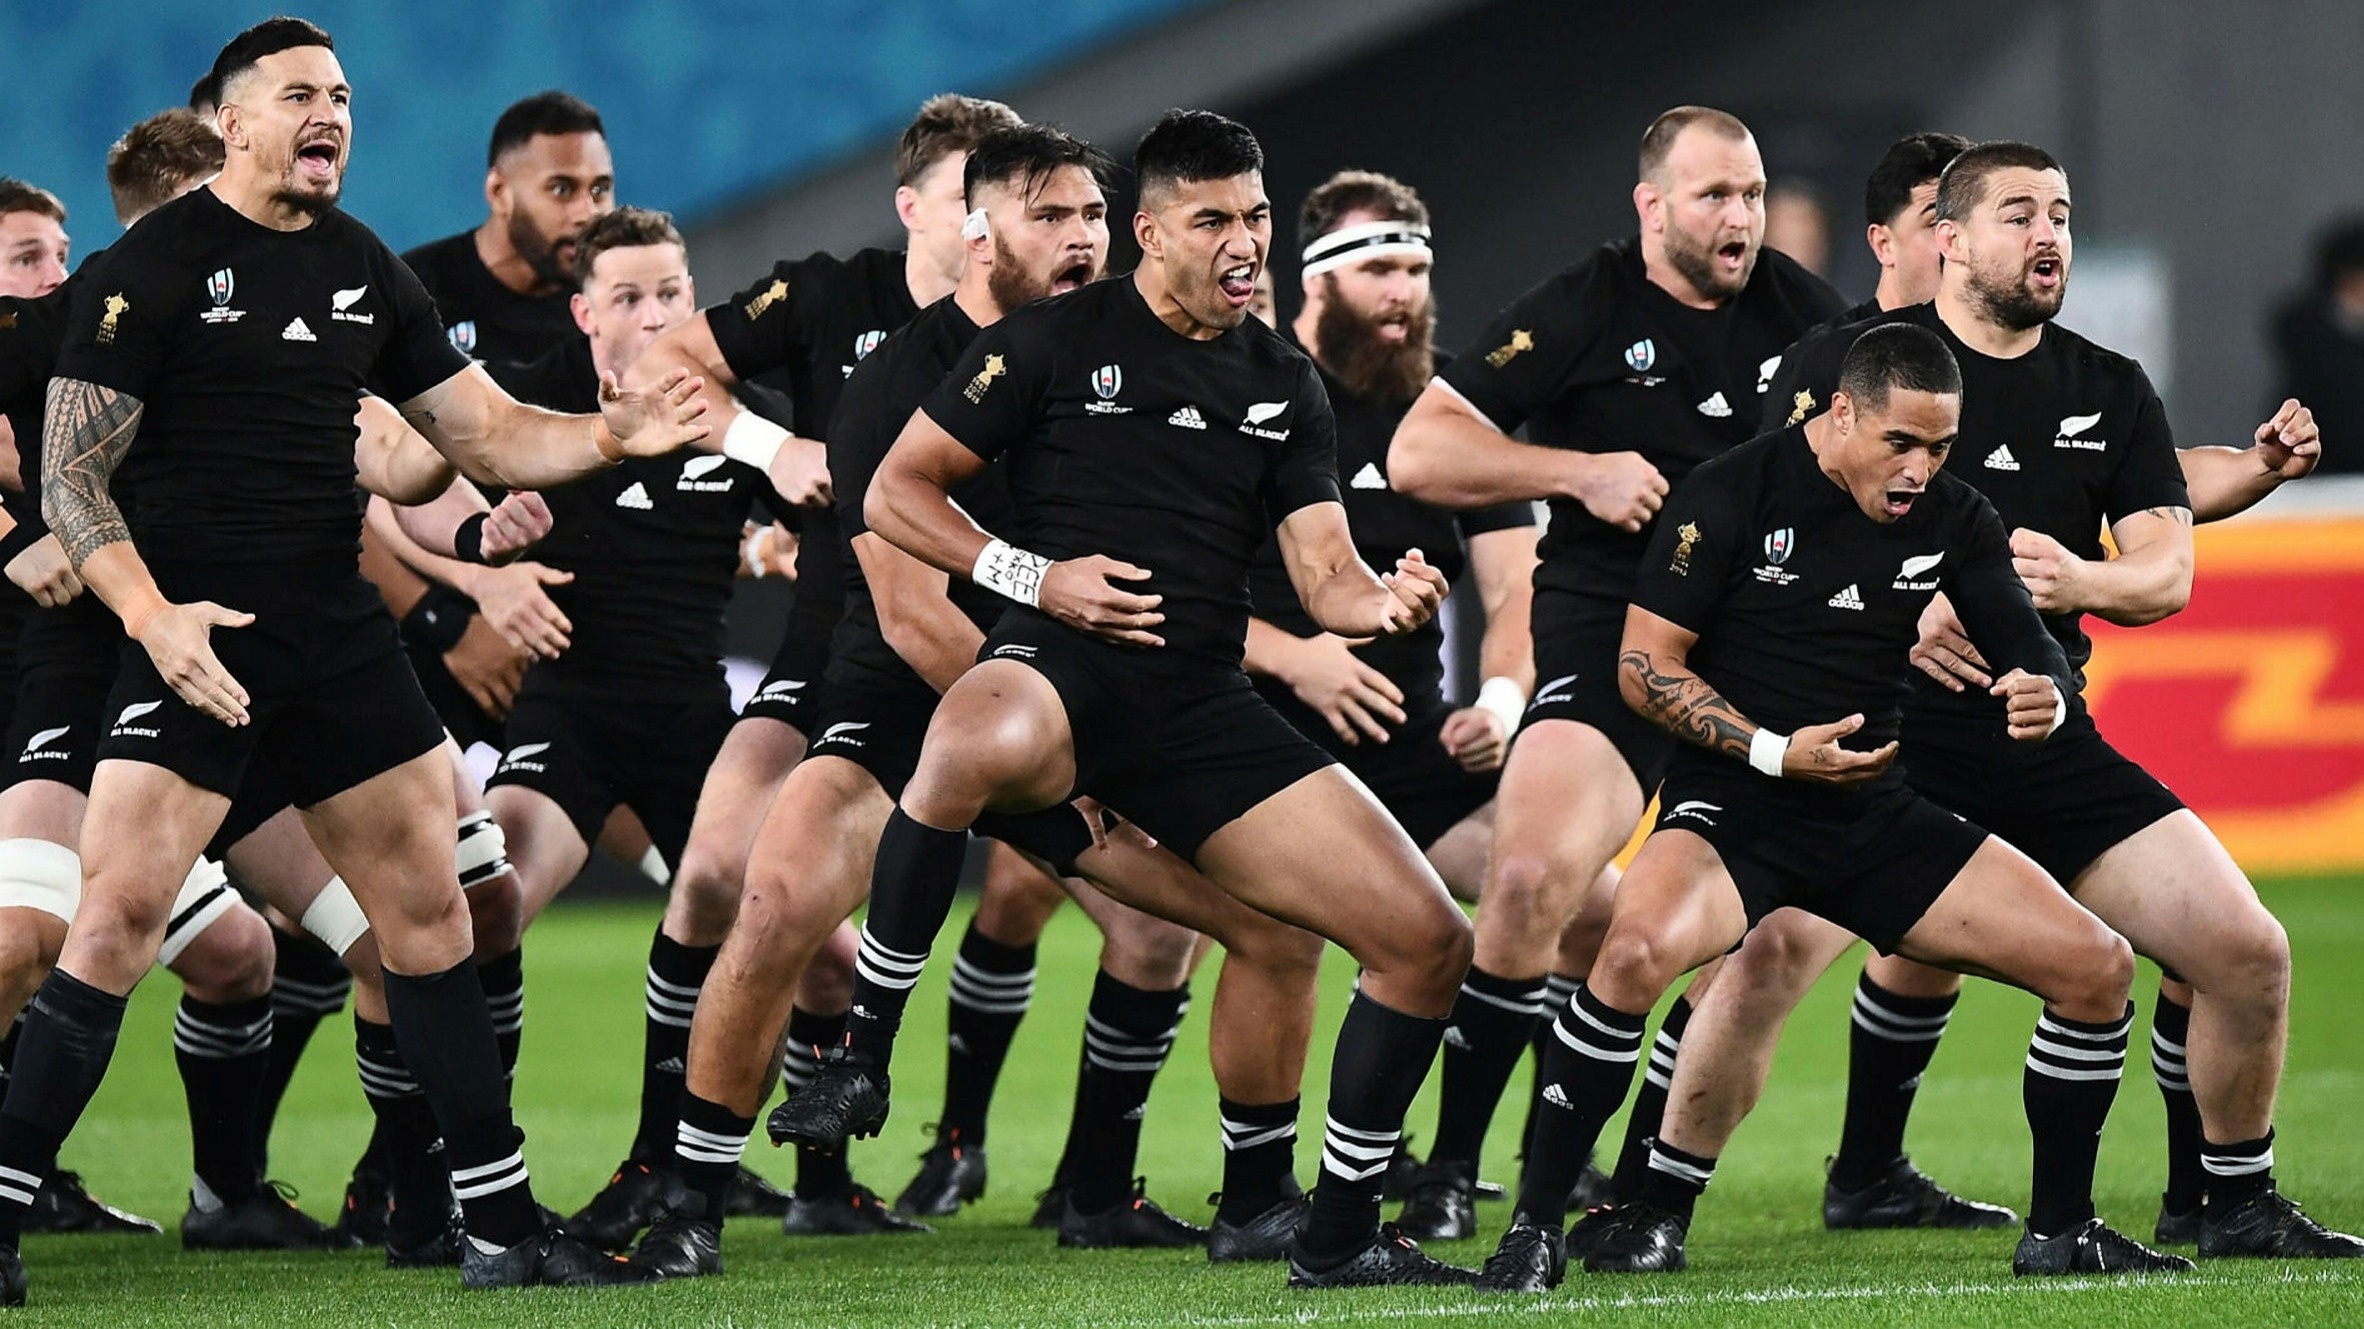 Haka: New Zealand’s All Blacks, Performing the Maori traditional dance before a rugby match. 2370x1330 HD Wallpaper.